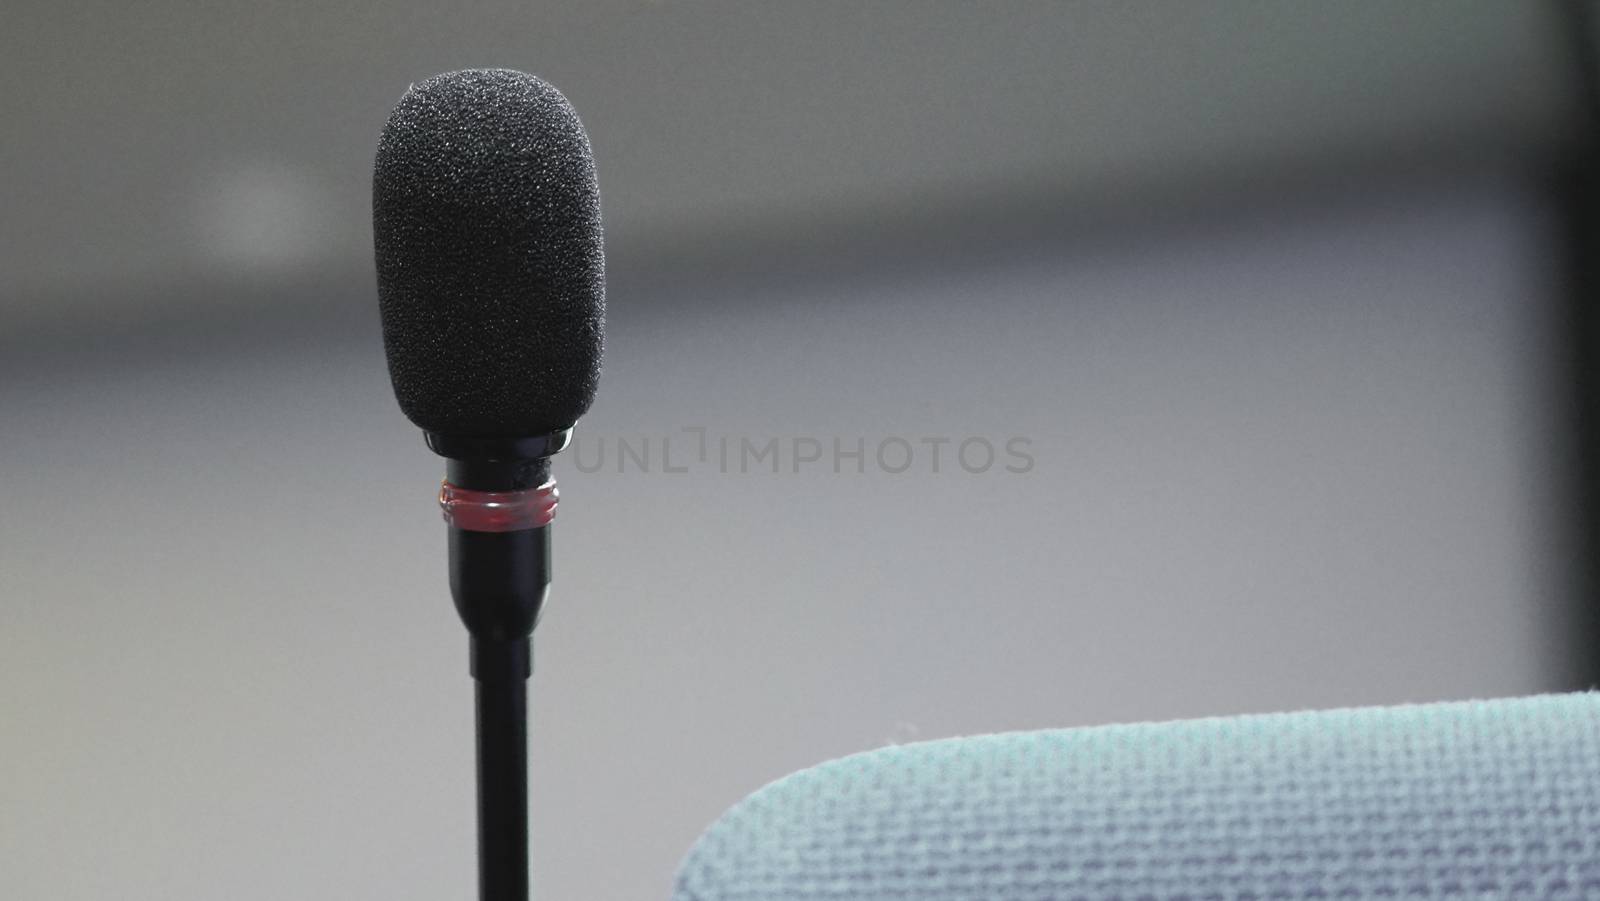 Mini microphone speaker in conference hall for speech in business seminar or organisation training or study and lecture and blurry images background.